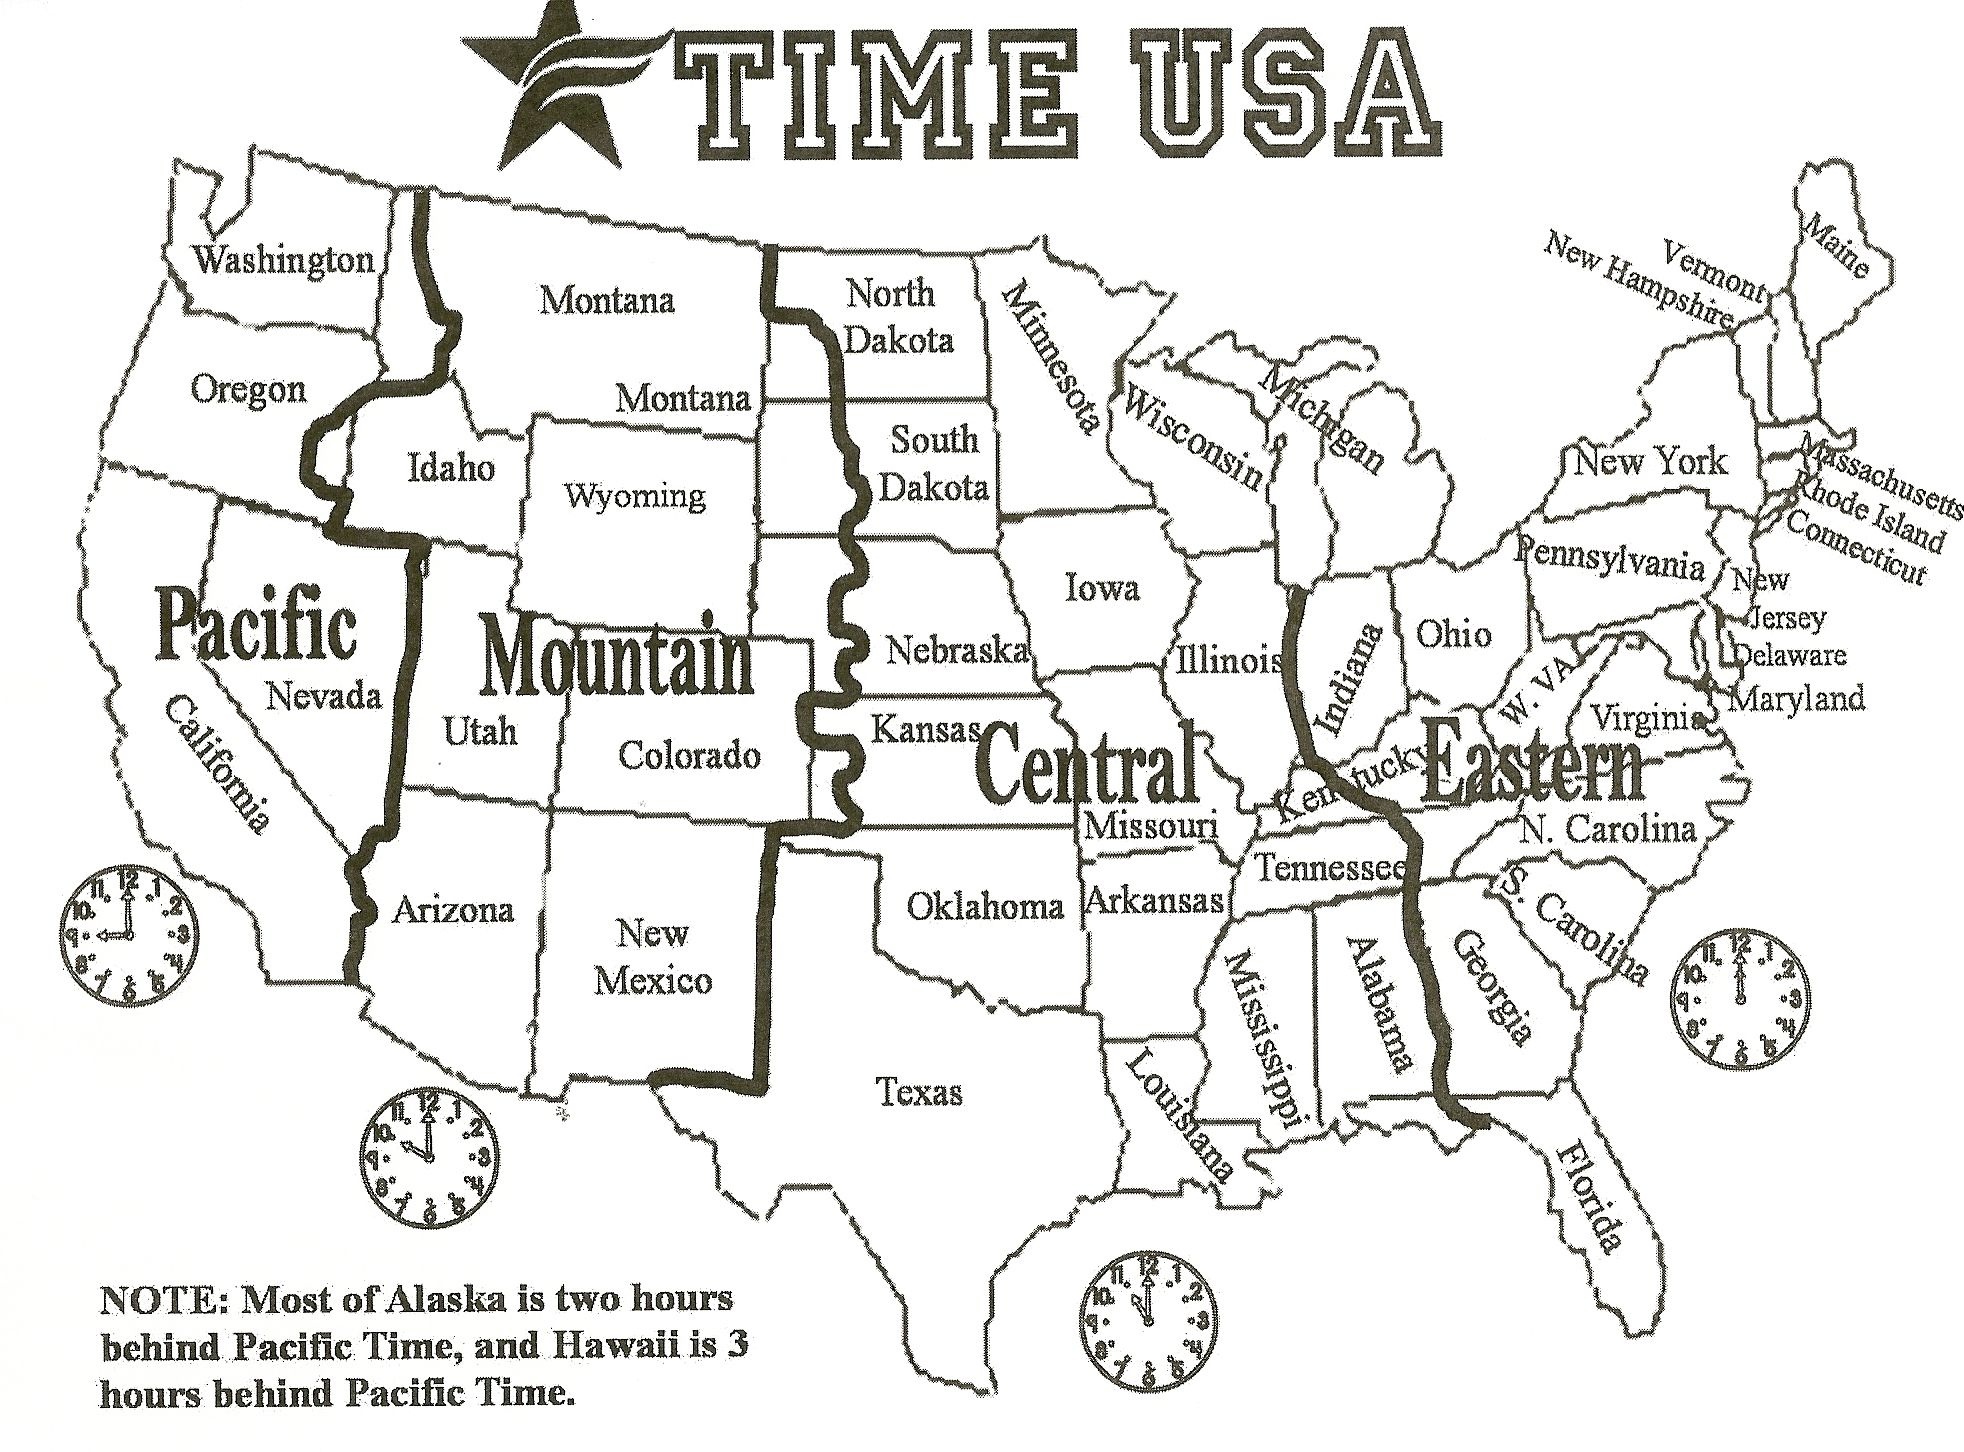 Black And White Us Time Zone Map - Google Search | Social Studies - Free Printable Us Timezone Map With State Names